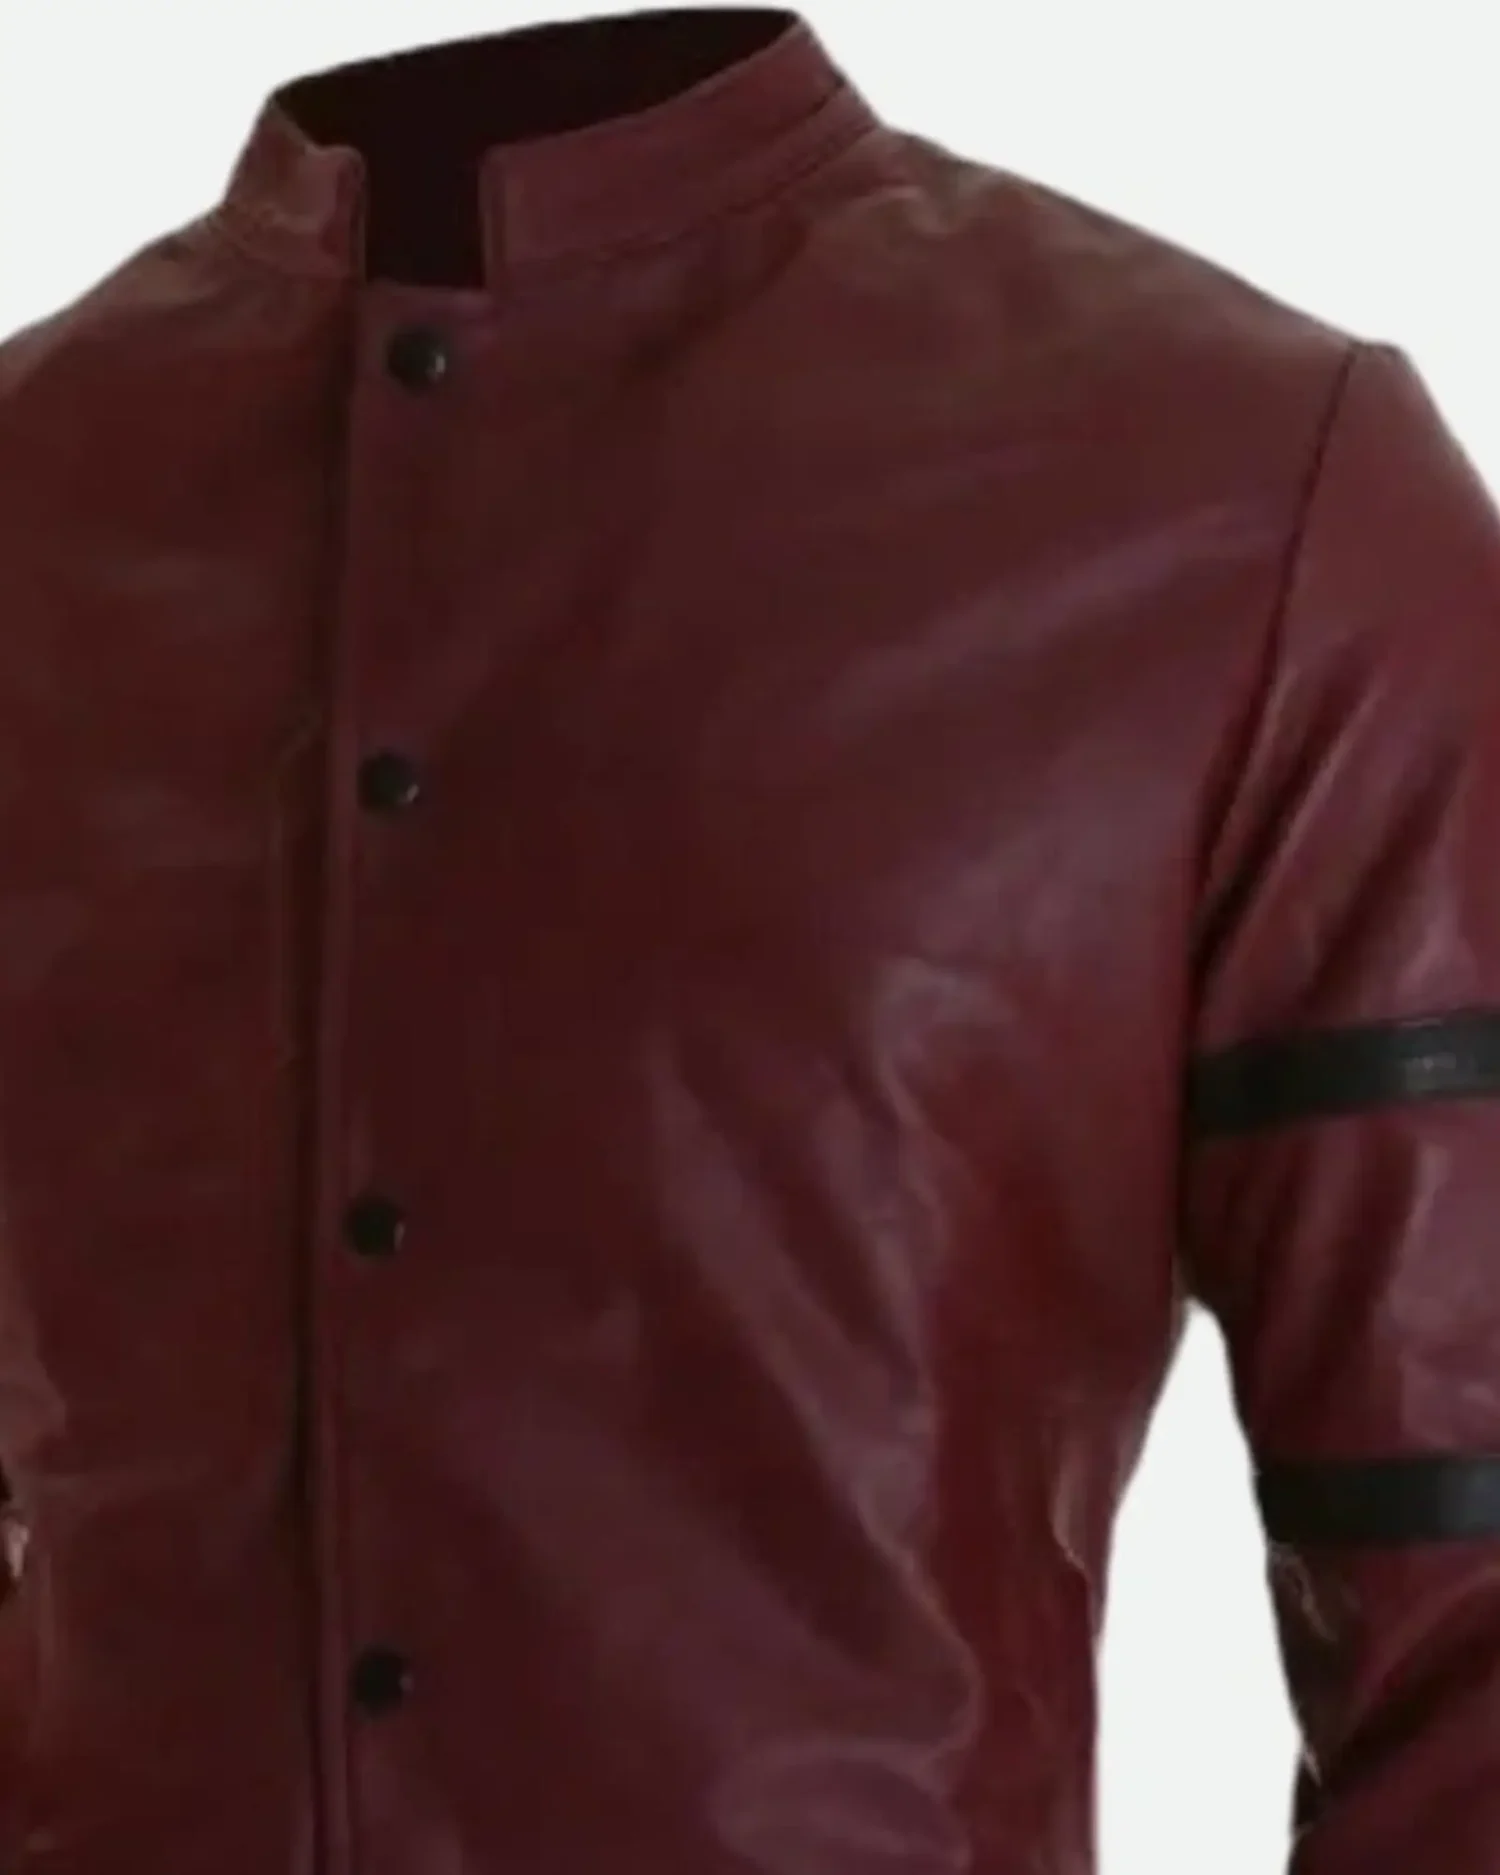 Vin Diesel Fast And Furious Red Leather Jacket